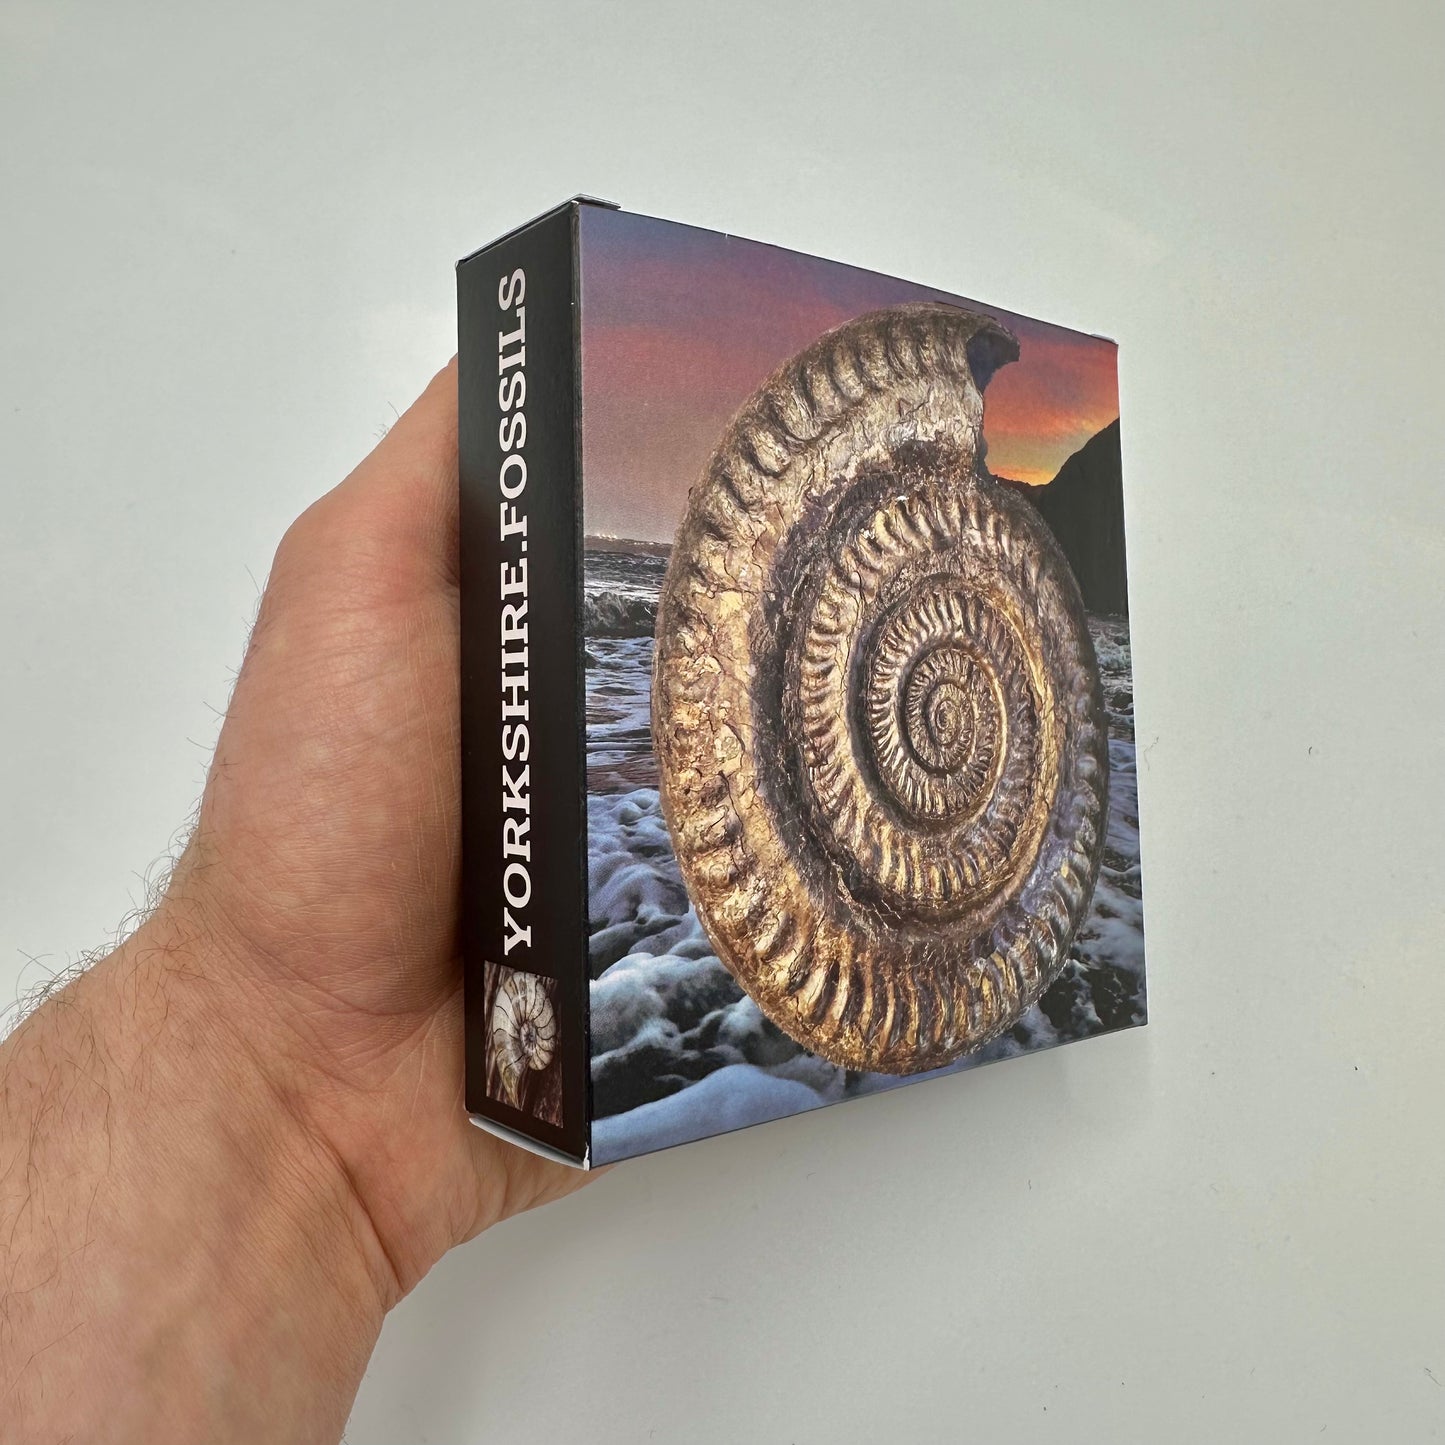 White Iridescent Madagascan Ammonite Fossil With Box And Display Case - Cretaceous Ammonite Fossil